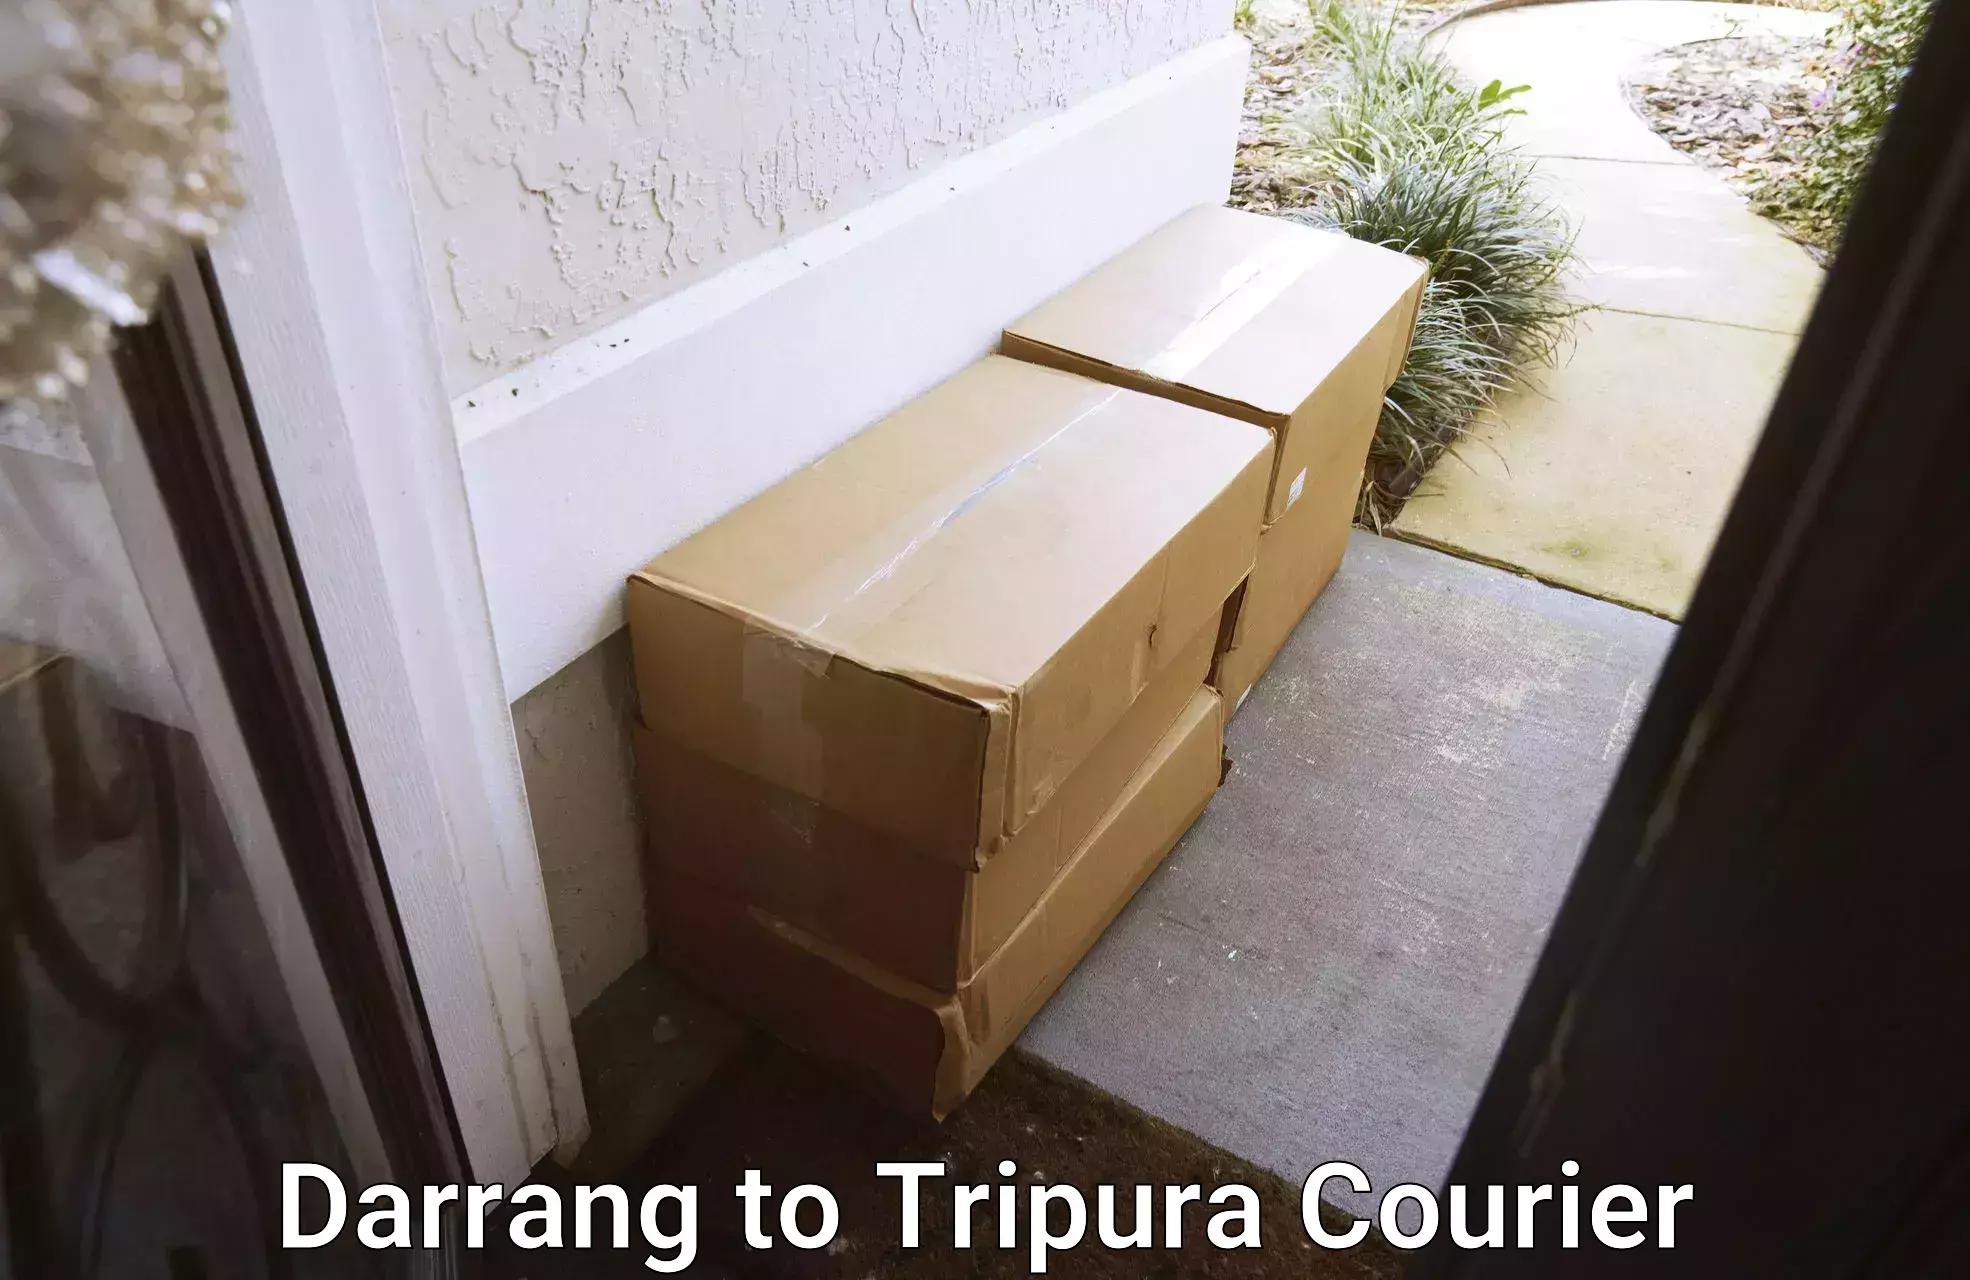 State-of-the-art courier technology Darrang to Udaipur Tripura